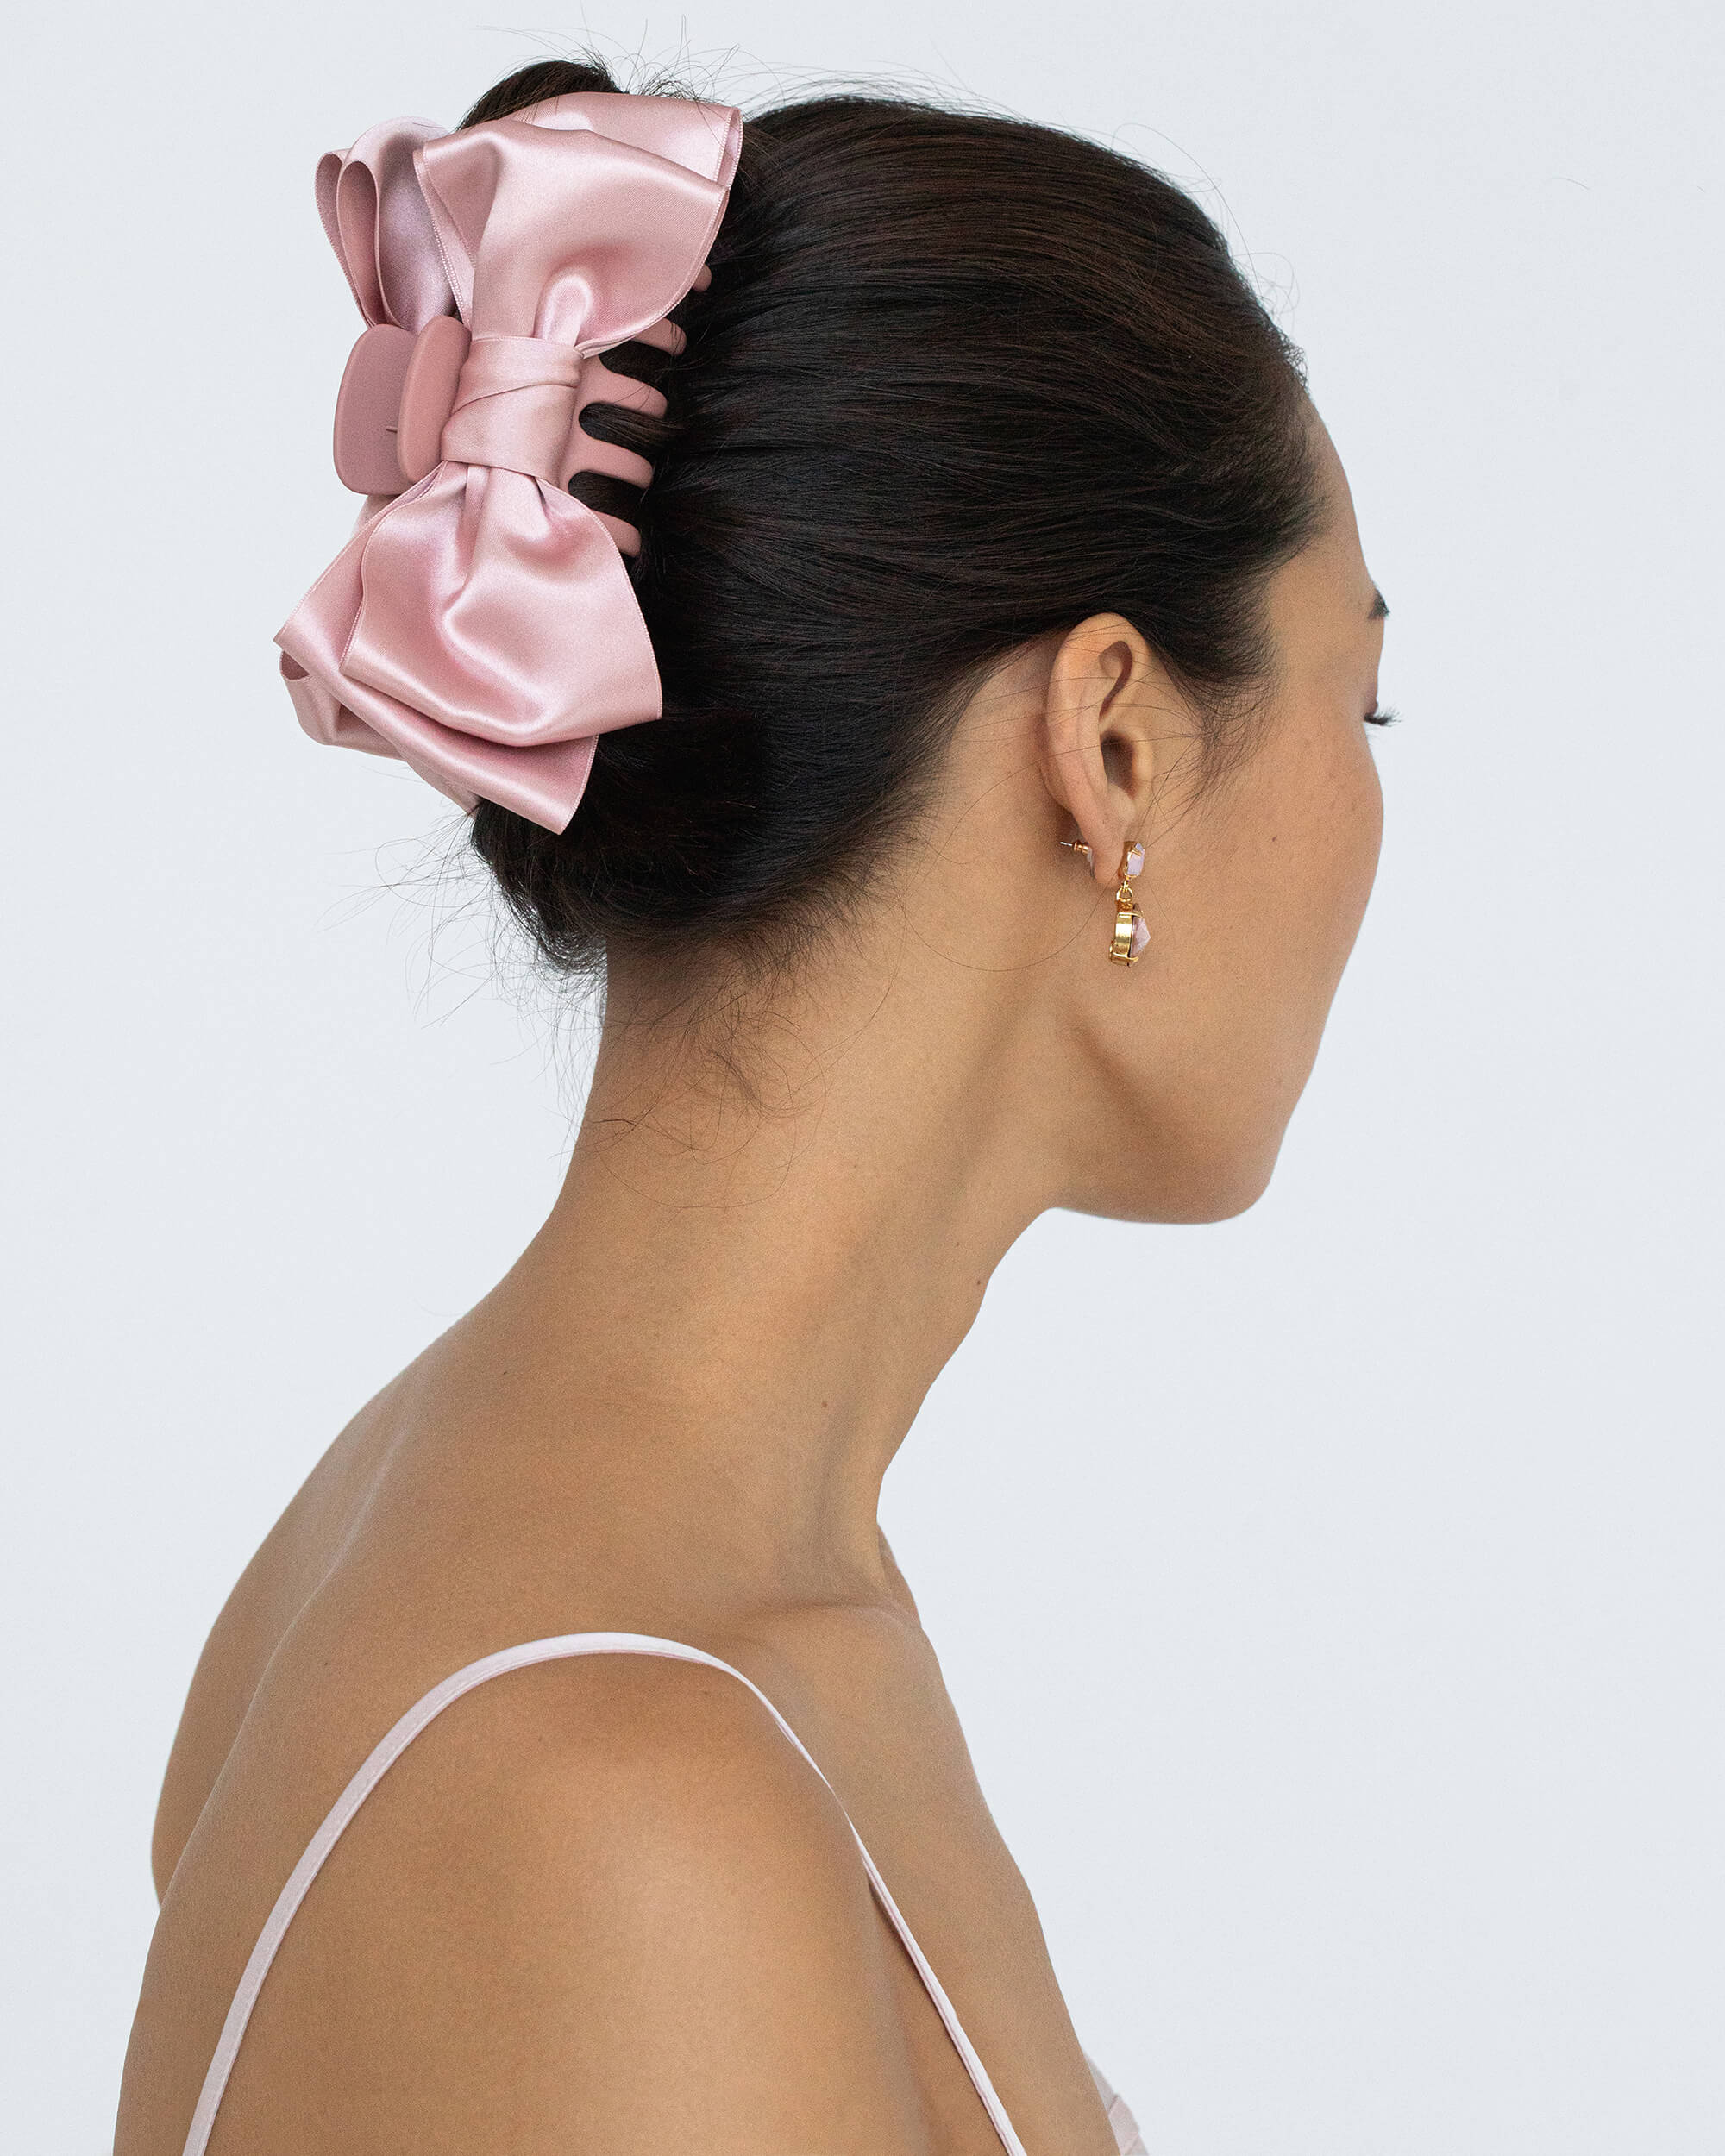 8 Pearl Hair Accessories and Style Ideas to Try